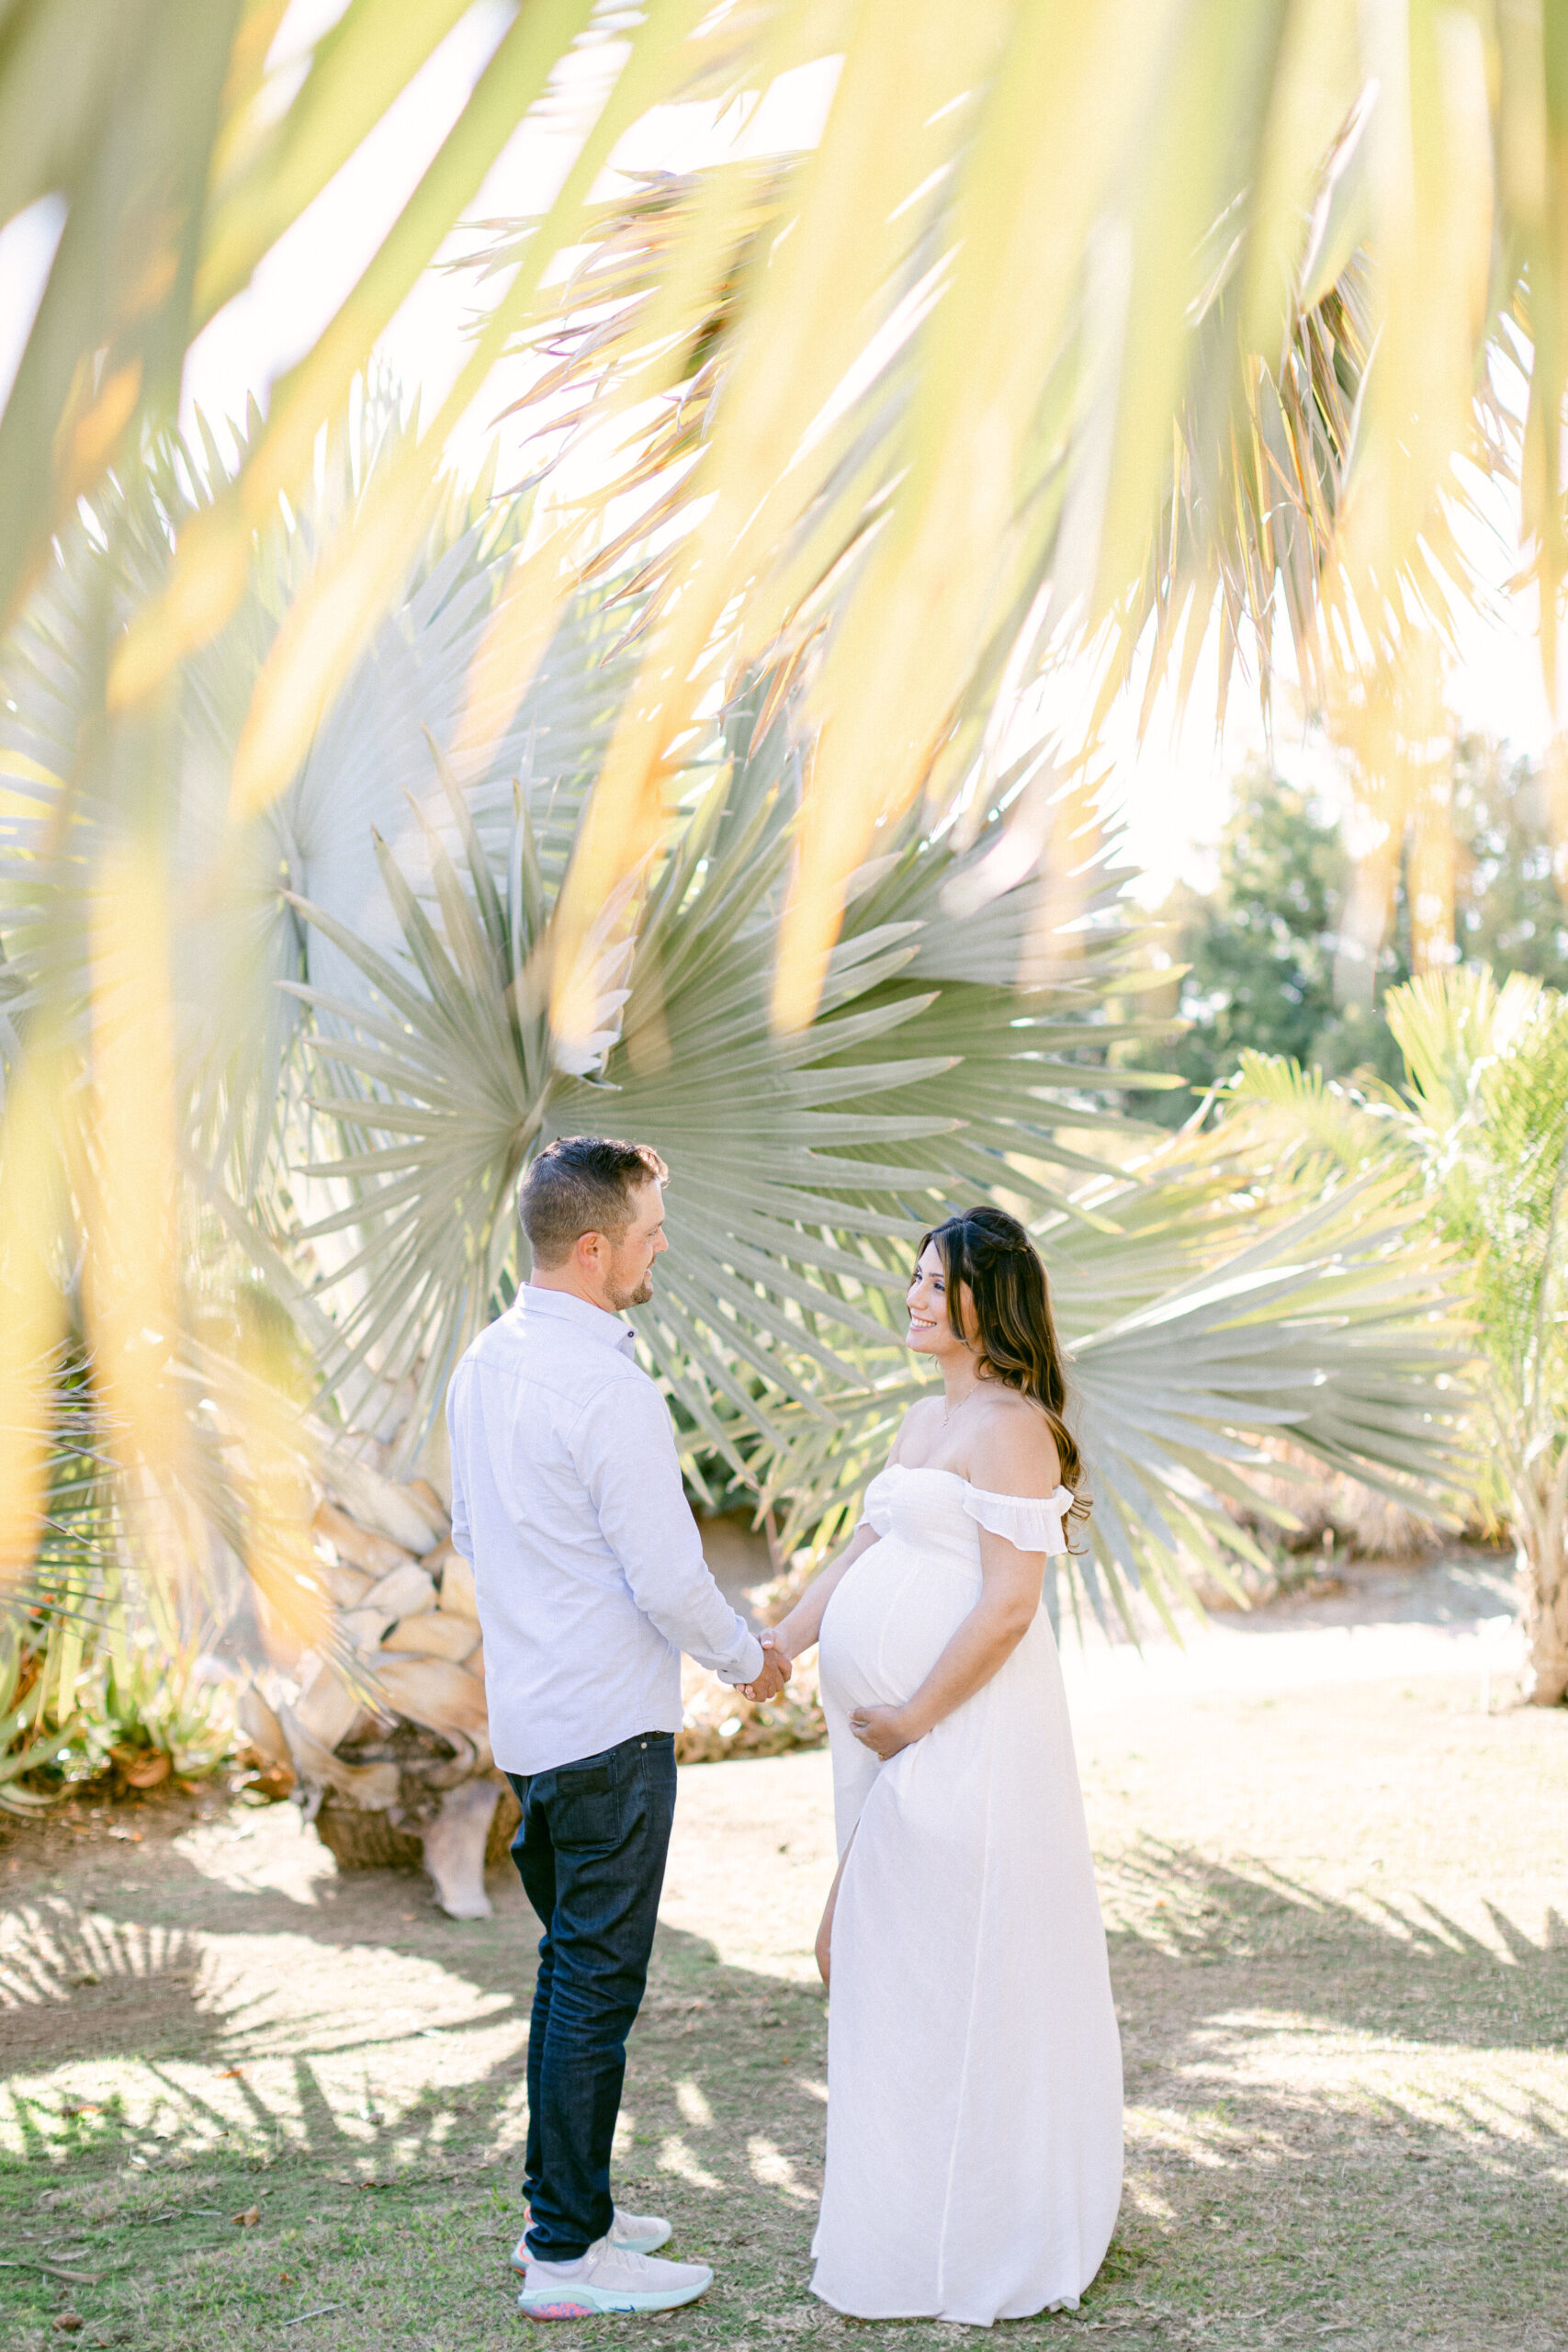 Husband and wife hold hands and smile at each other under palm trees during their maternity photography session at the LA Arboretum.